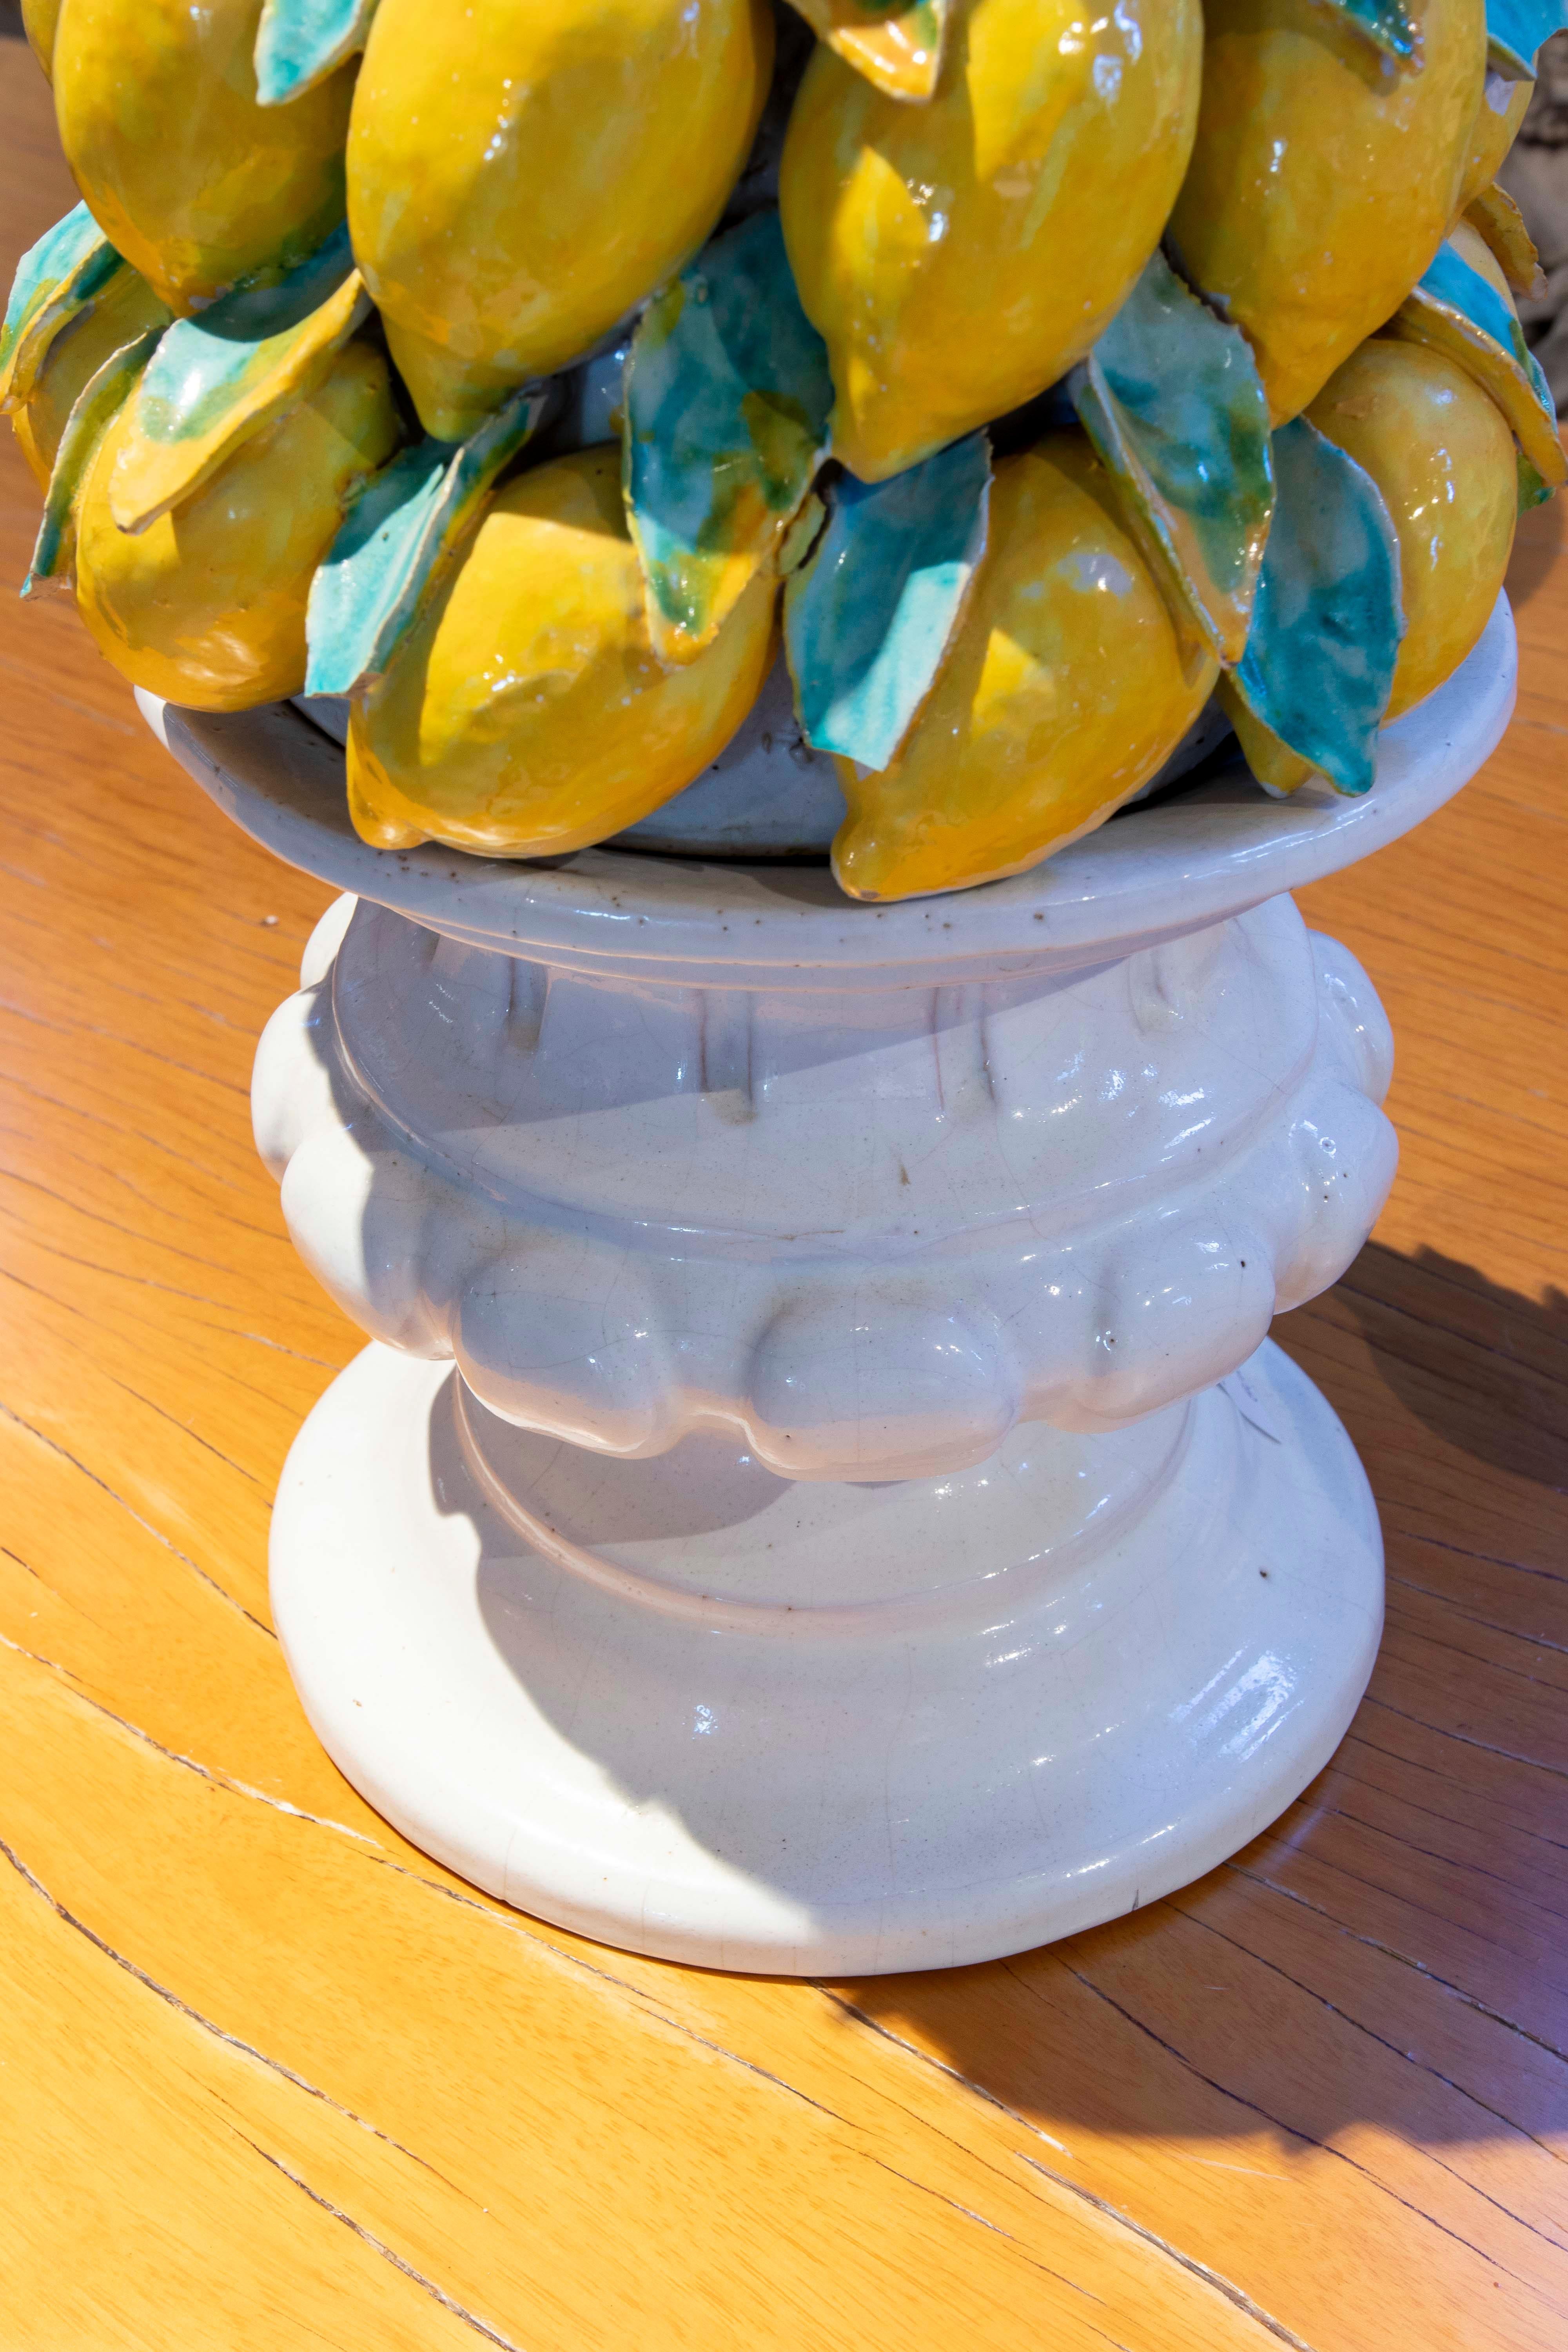 1970s Italian Ceramic Centrepiece with Lemons and Glazed Base  For Sale 3